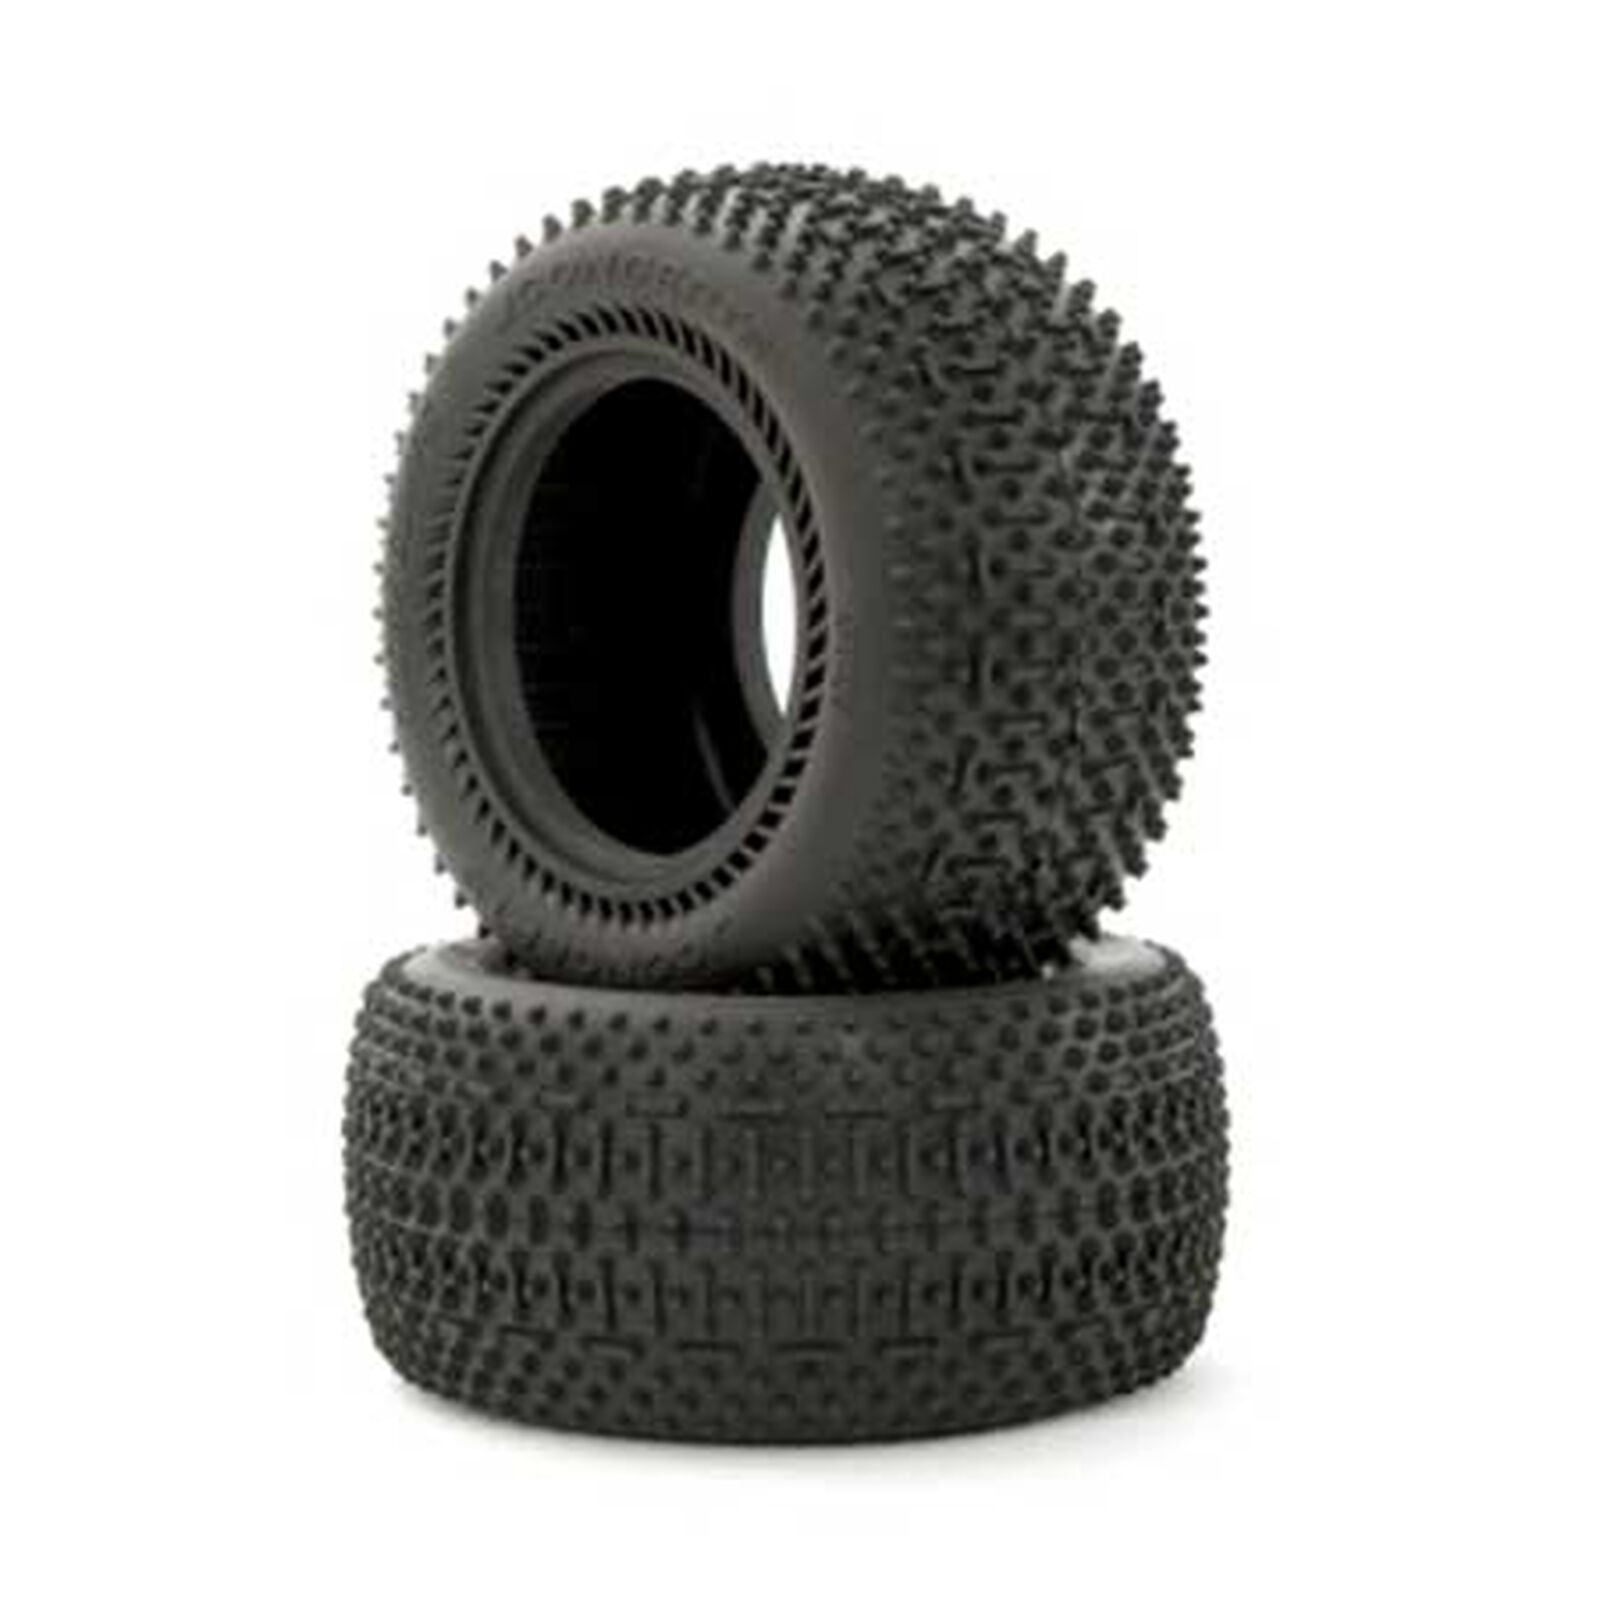 1/10 Goose Bumps 2.2” Truggy Tires and Inserts, Green Compound (2)